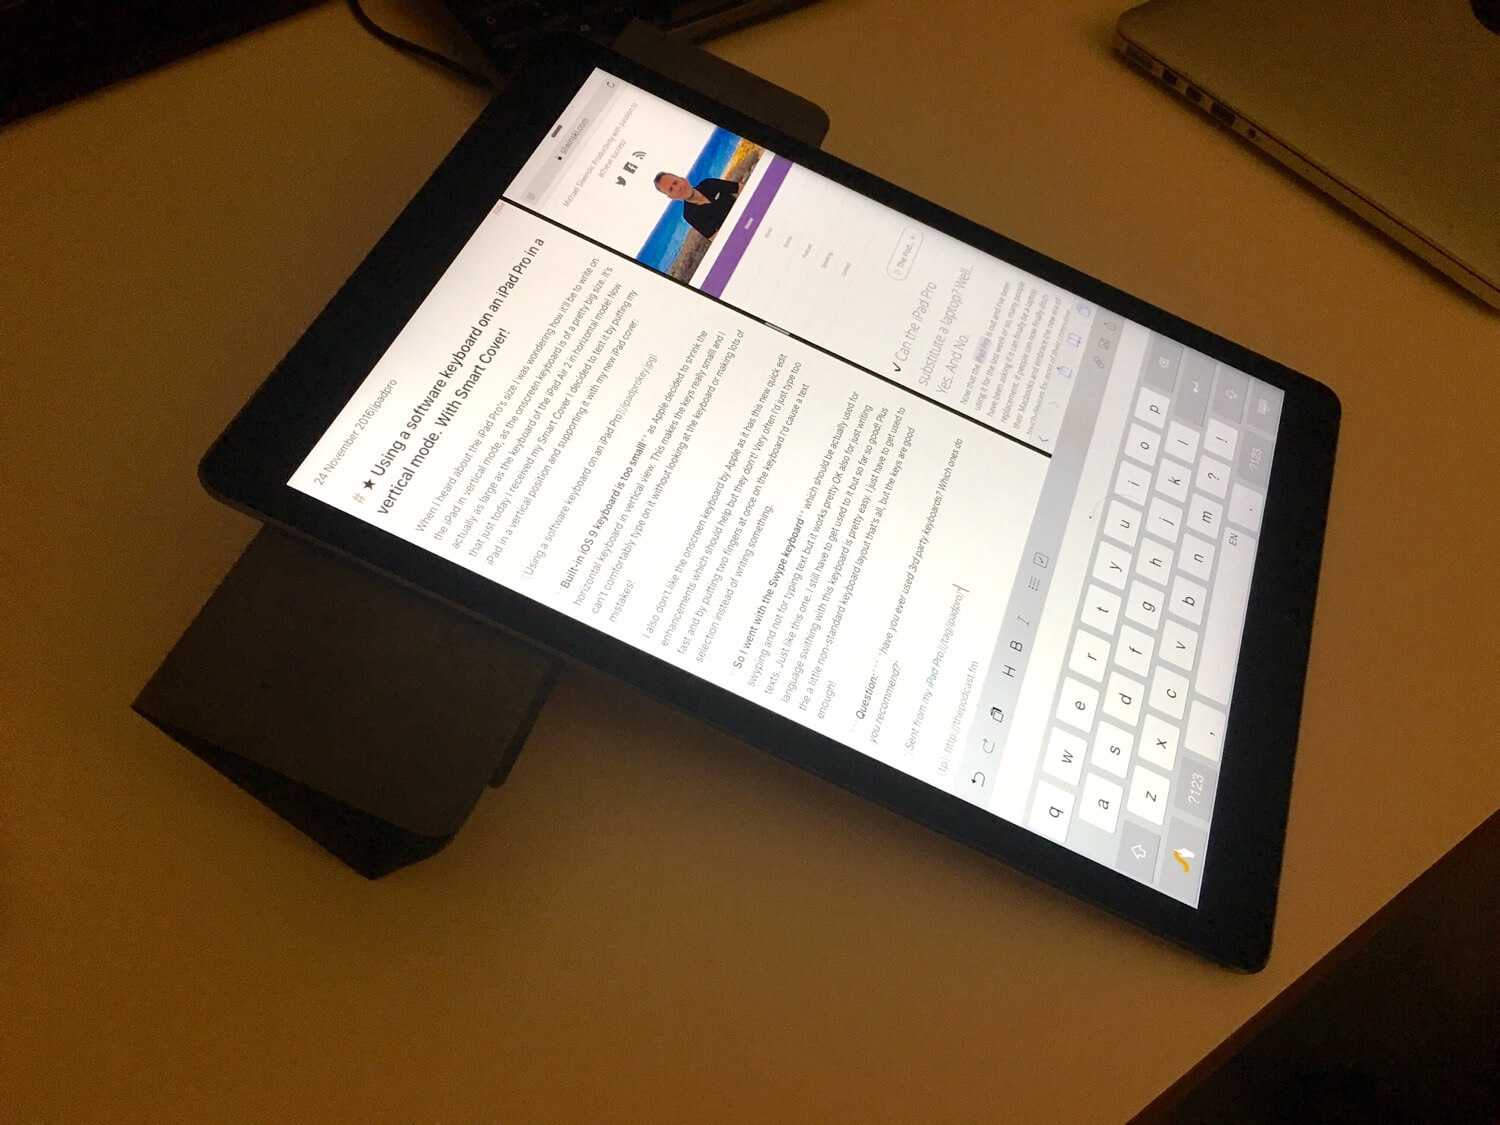 Using a software keyboard on an iPad Pro in a vertical mode. With Smart Cover!